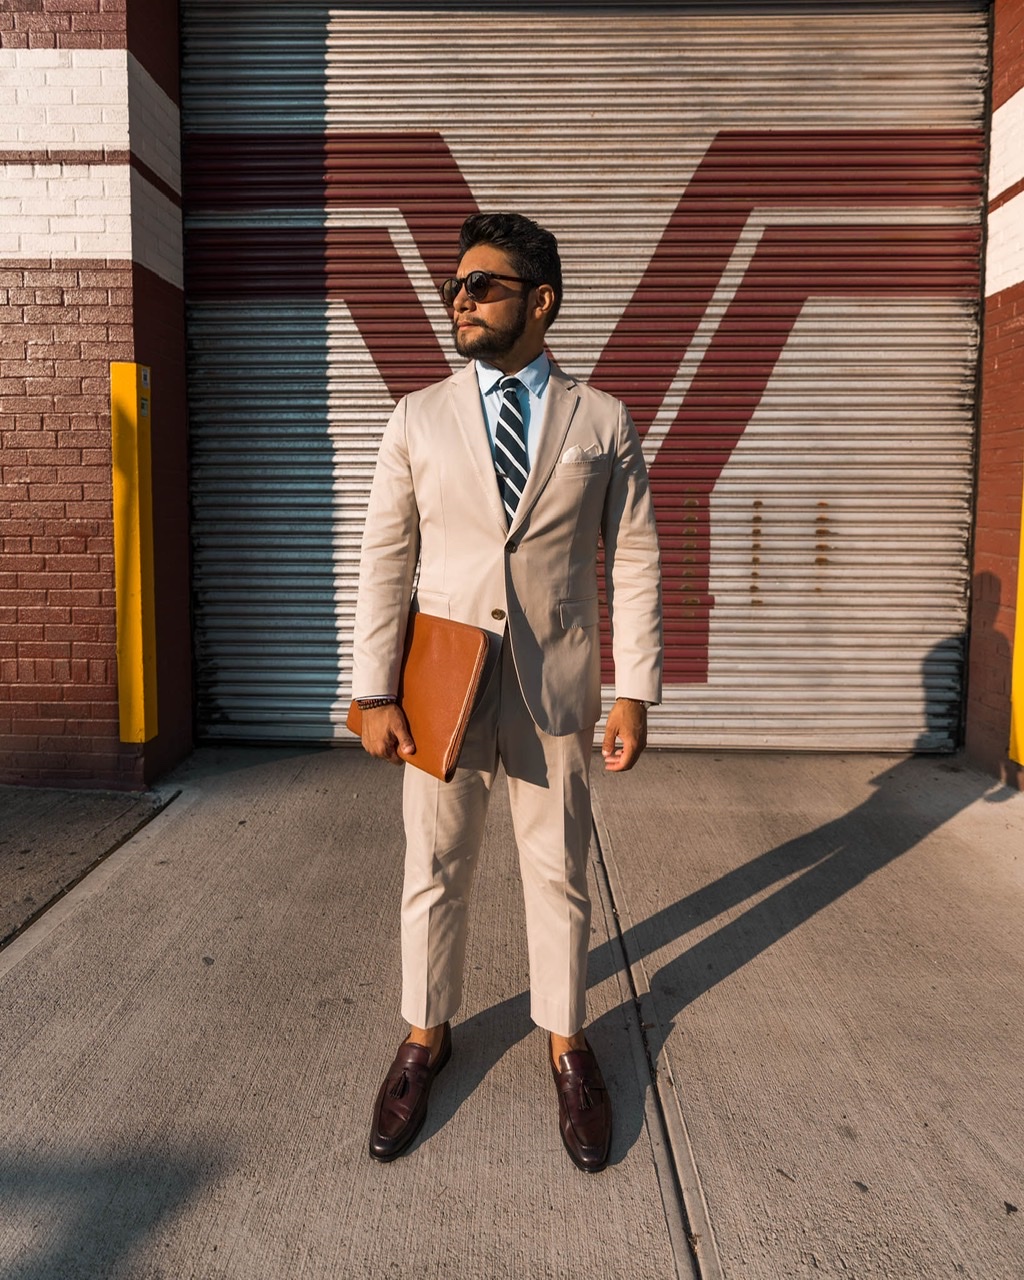 7 STYLING TIPS EVERY SHORT GUY SHOULD KNOW - suits for short men - short men suits - clothes for short men - peter manning nyc - shirt guy clothes - short sized suits - dandy in the bronx - khaki suit - brown loafers